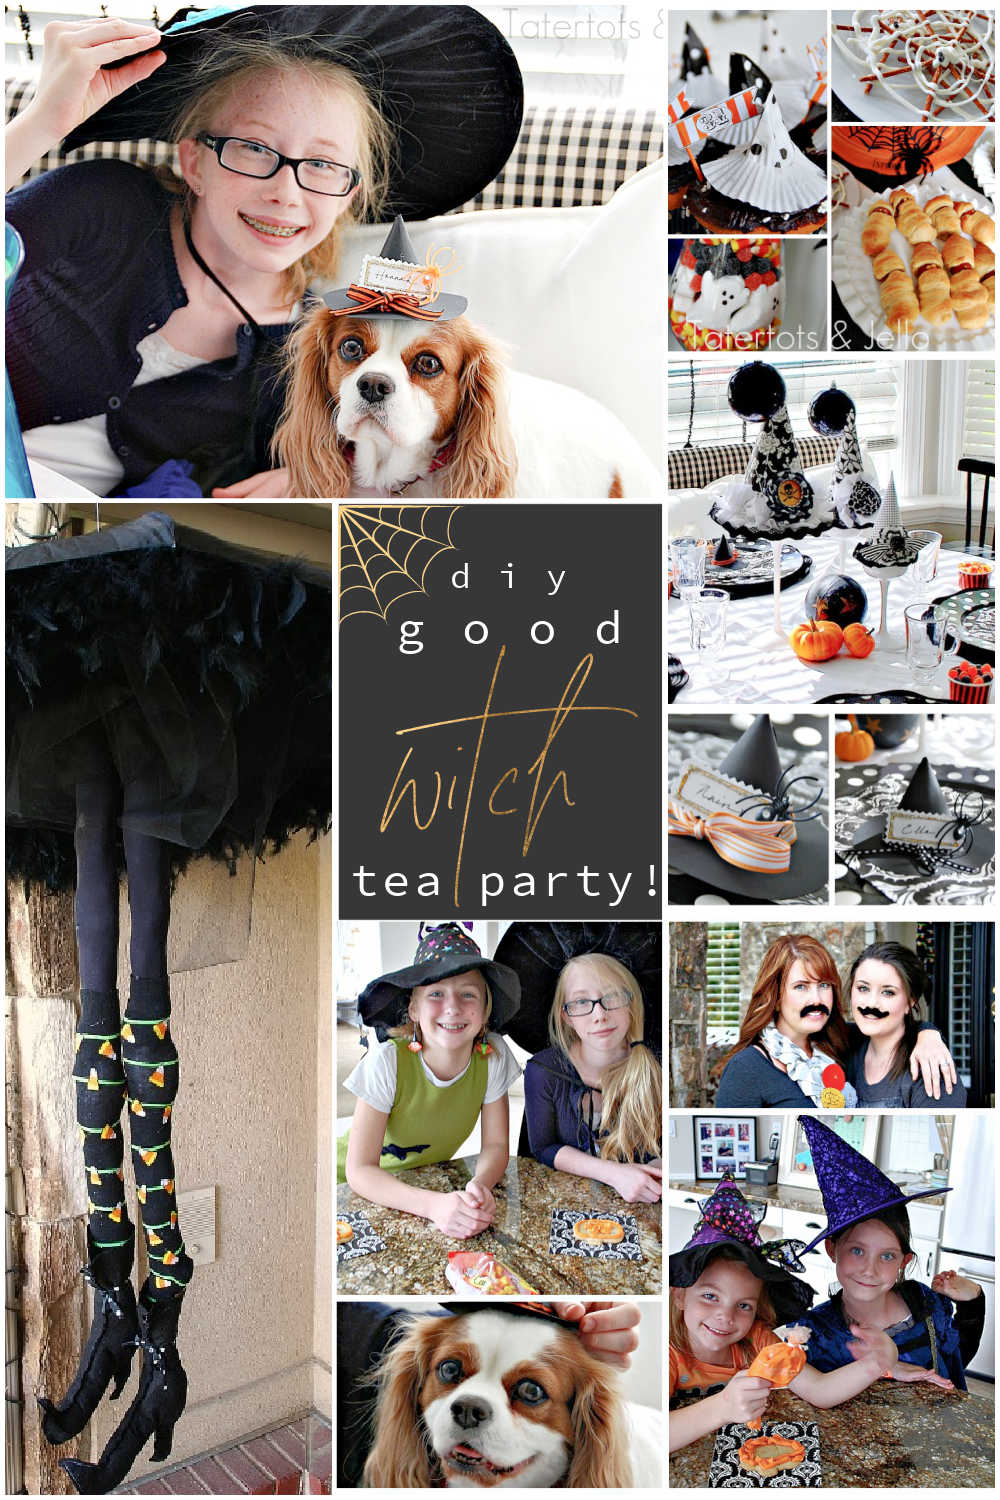 Good Witch Tea Party and Free Halloween Printables! Throw a sweet Halloween tea party with spooky treats and Witch party decor!